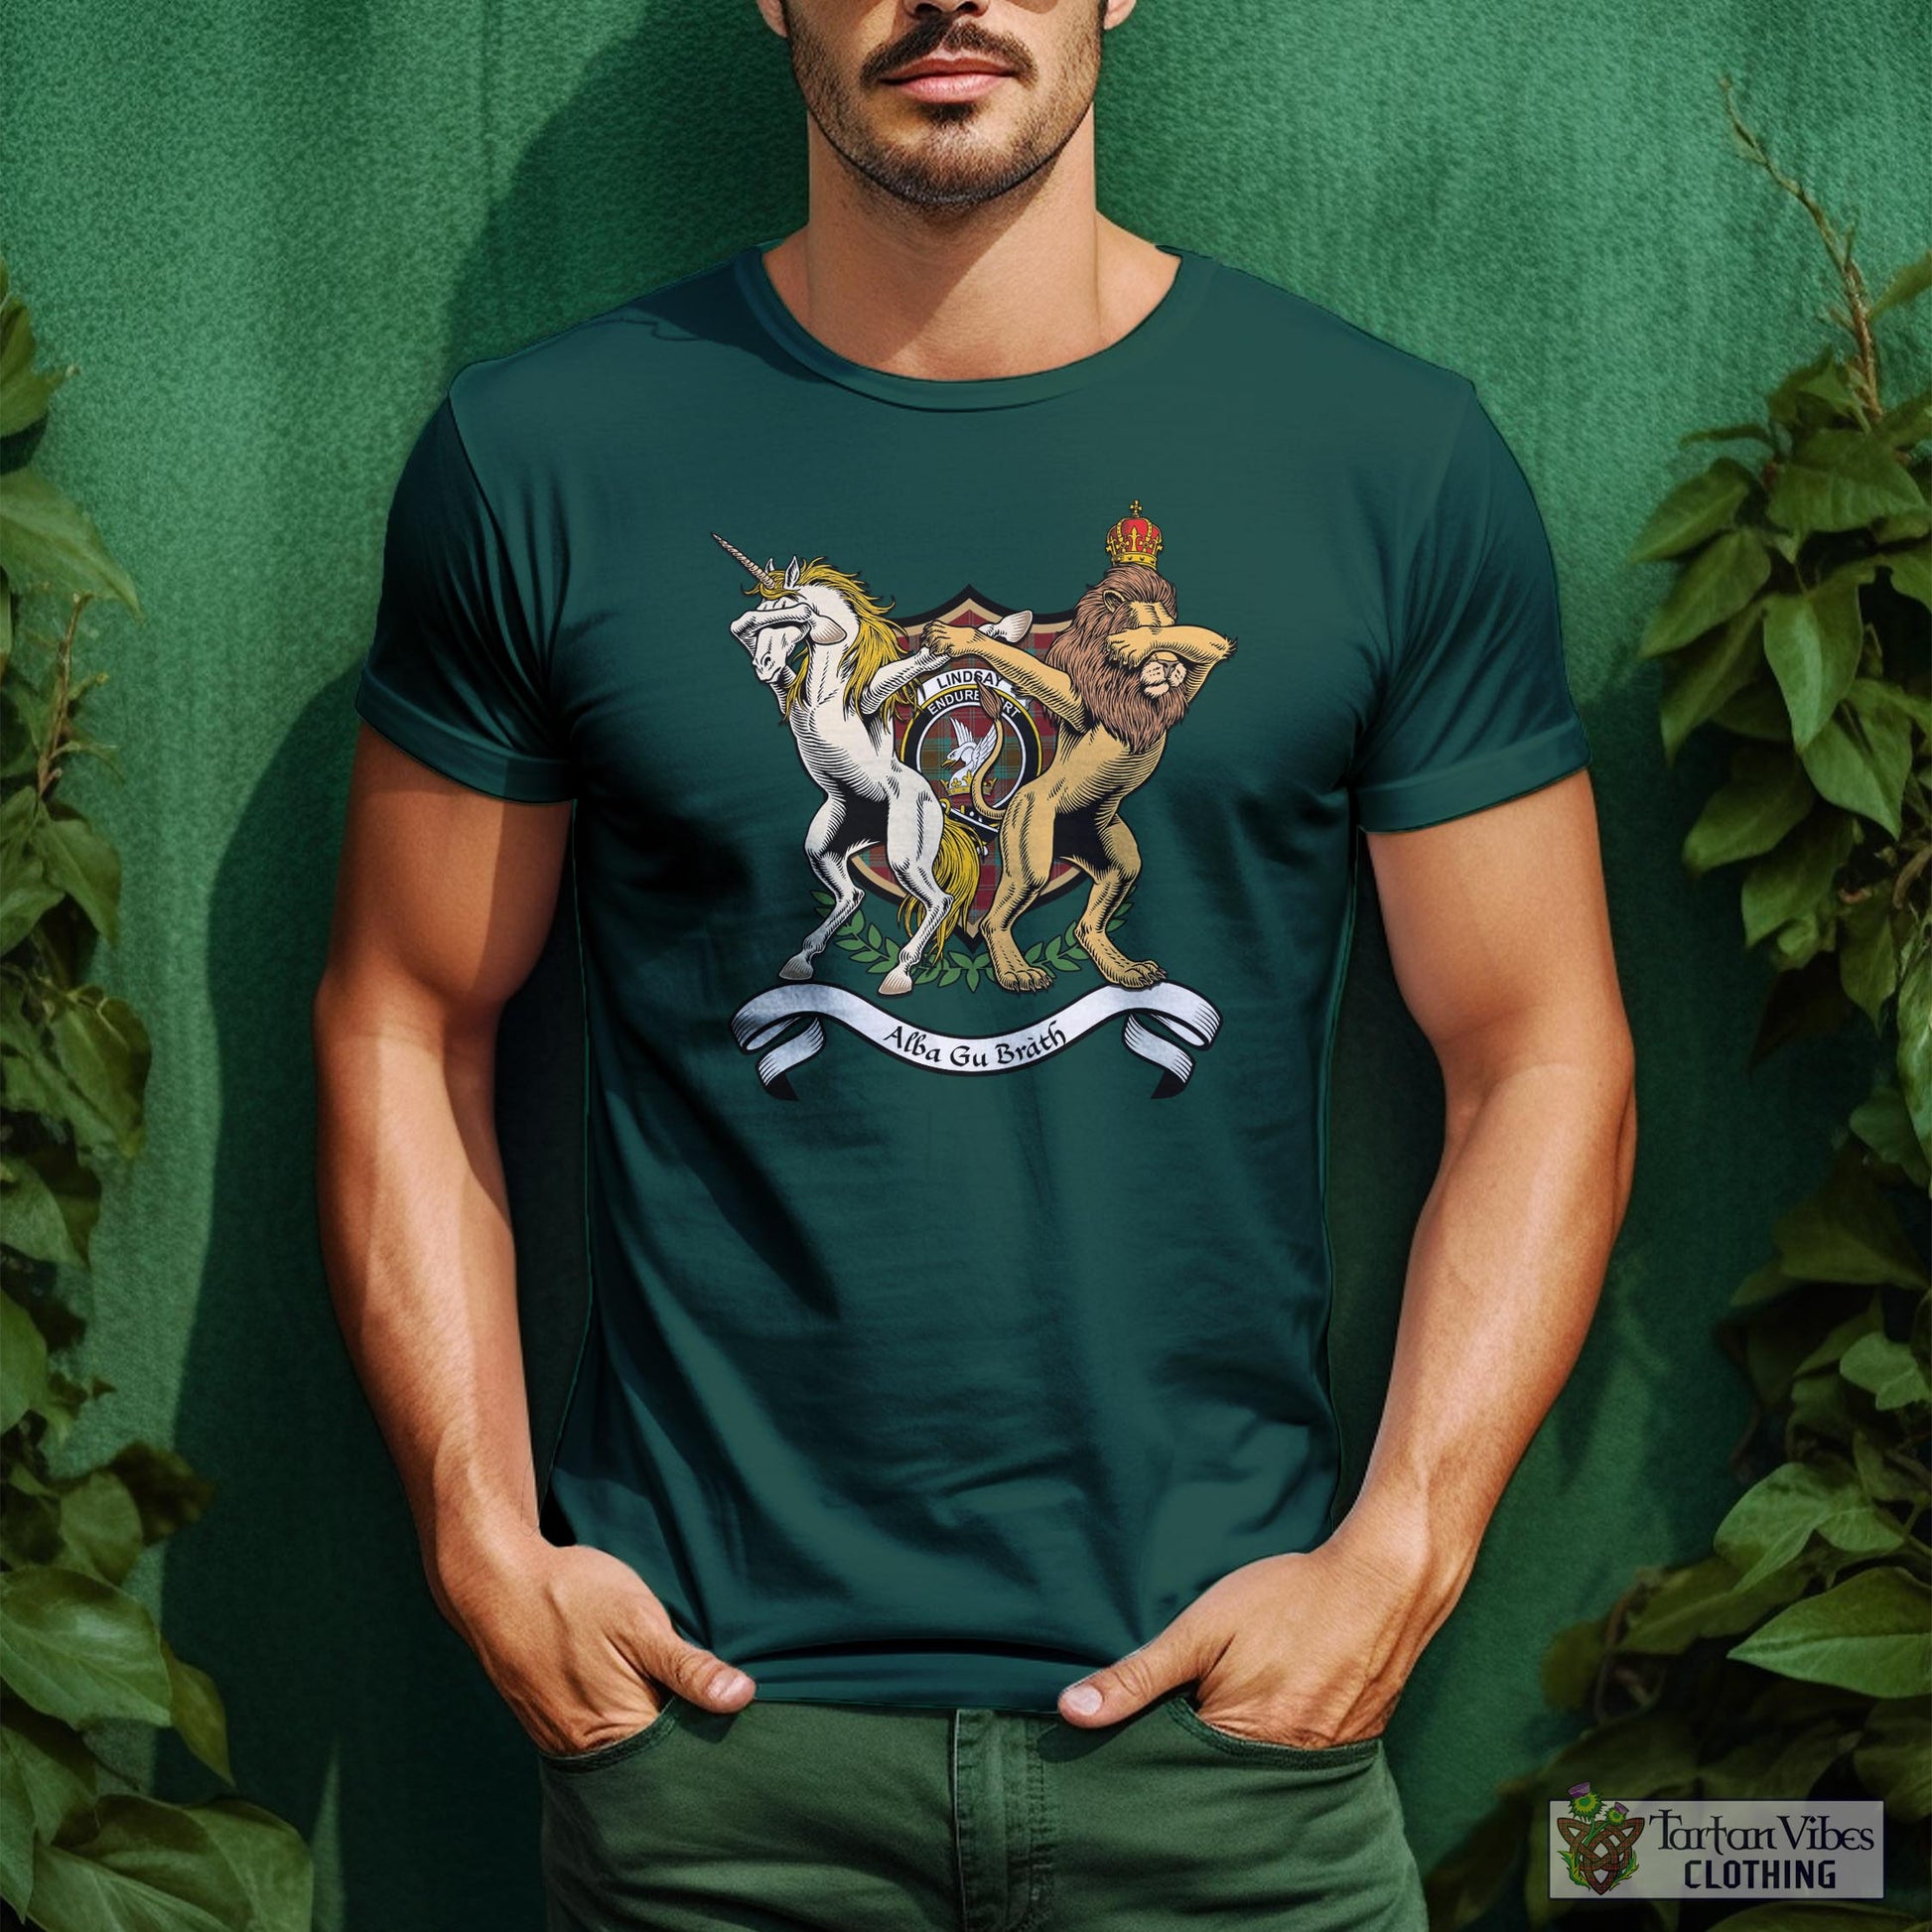 Tartan Vibes Clothing Lindsay Weathered Family Crest Cotton Men's T-Shirt with Scotland Royal Coat Of Arm Funny Style